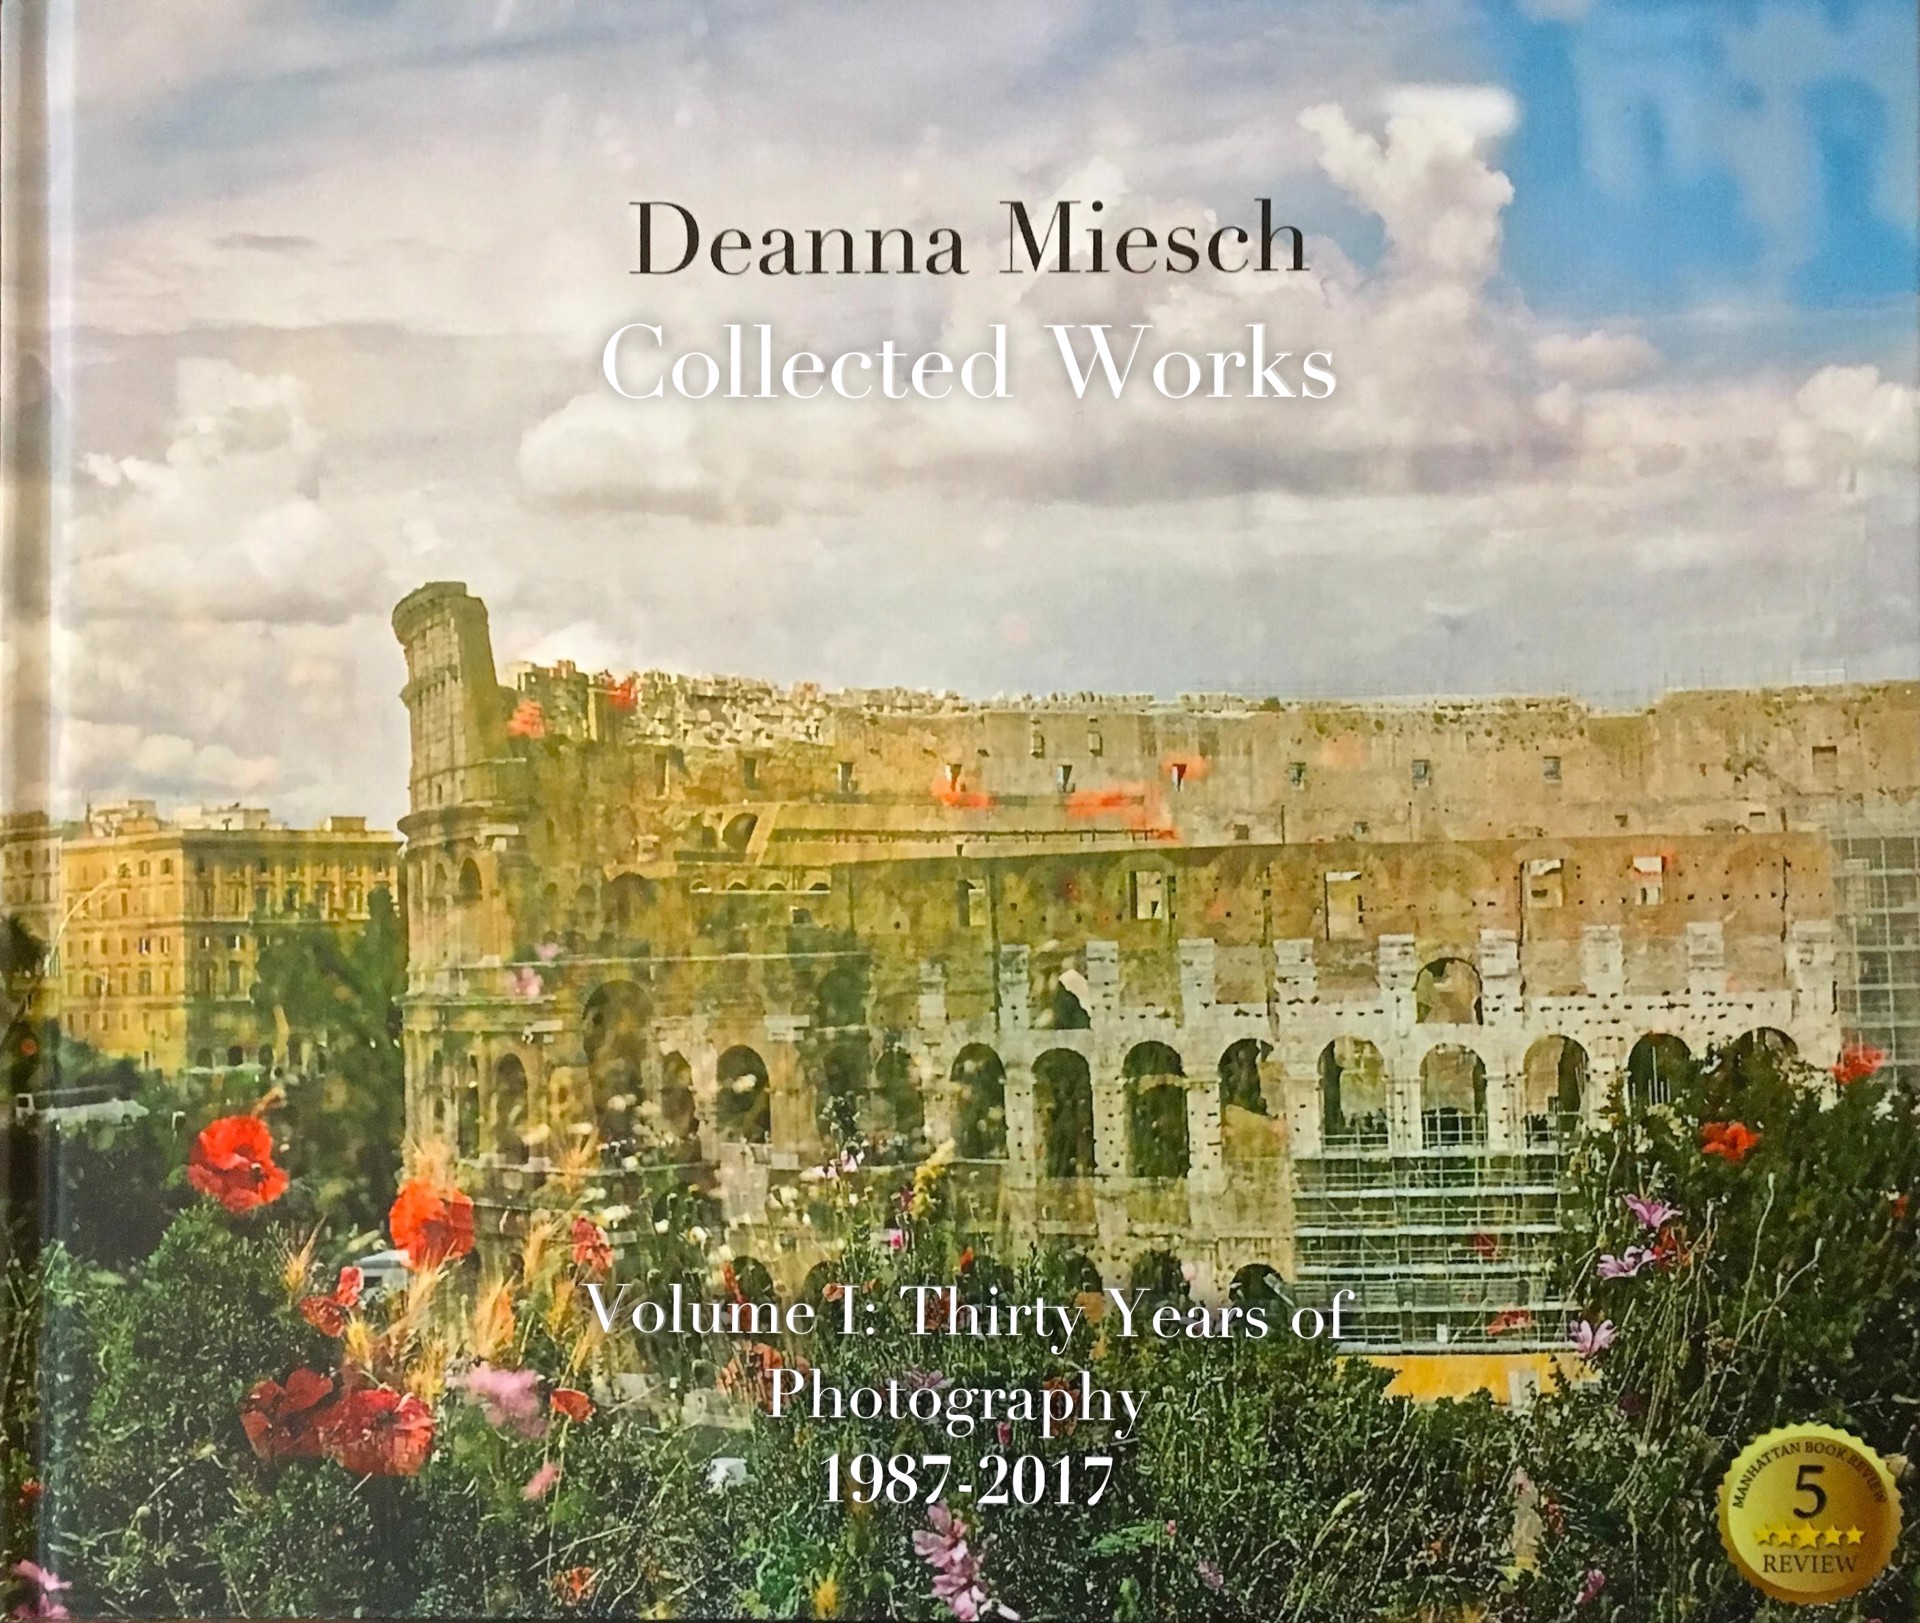 Deanna Miesch - Collected Works - Volume I:Thirty Years of Photography 1987-2017 by Deanna Miesch